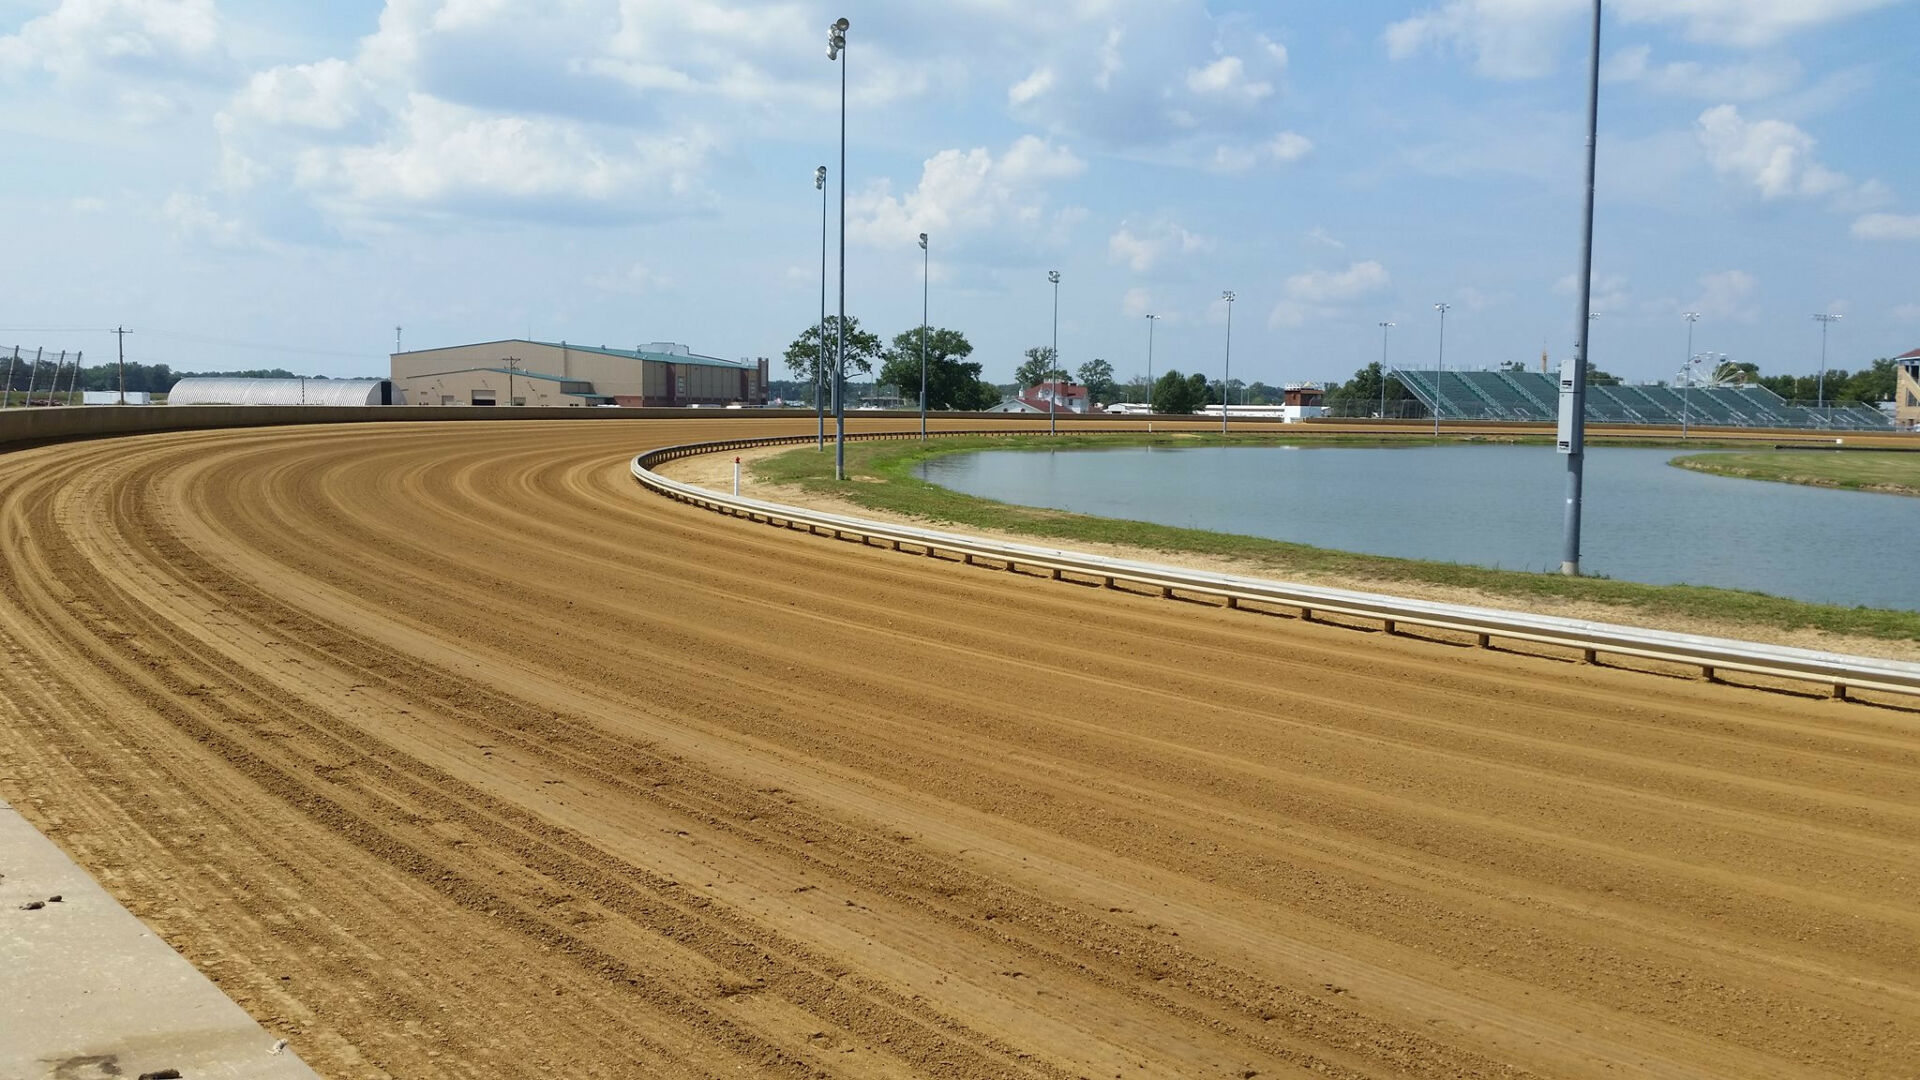 The mile racetrack at the Du Quoin State Fair Grounds. Photo courtesy AFT.